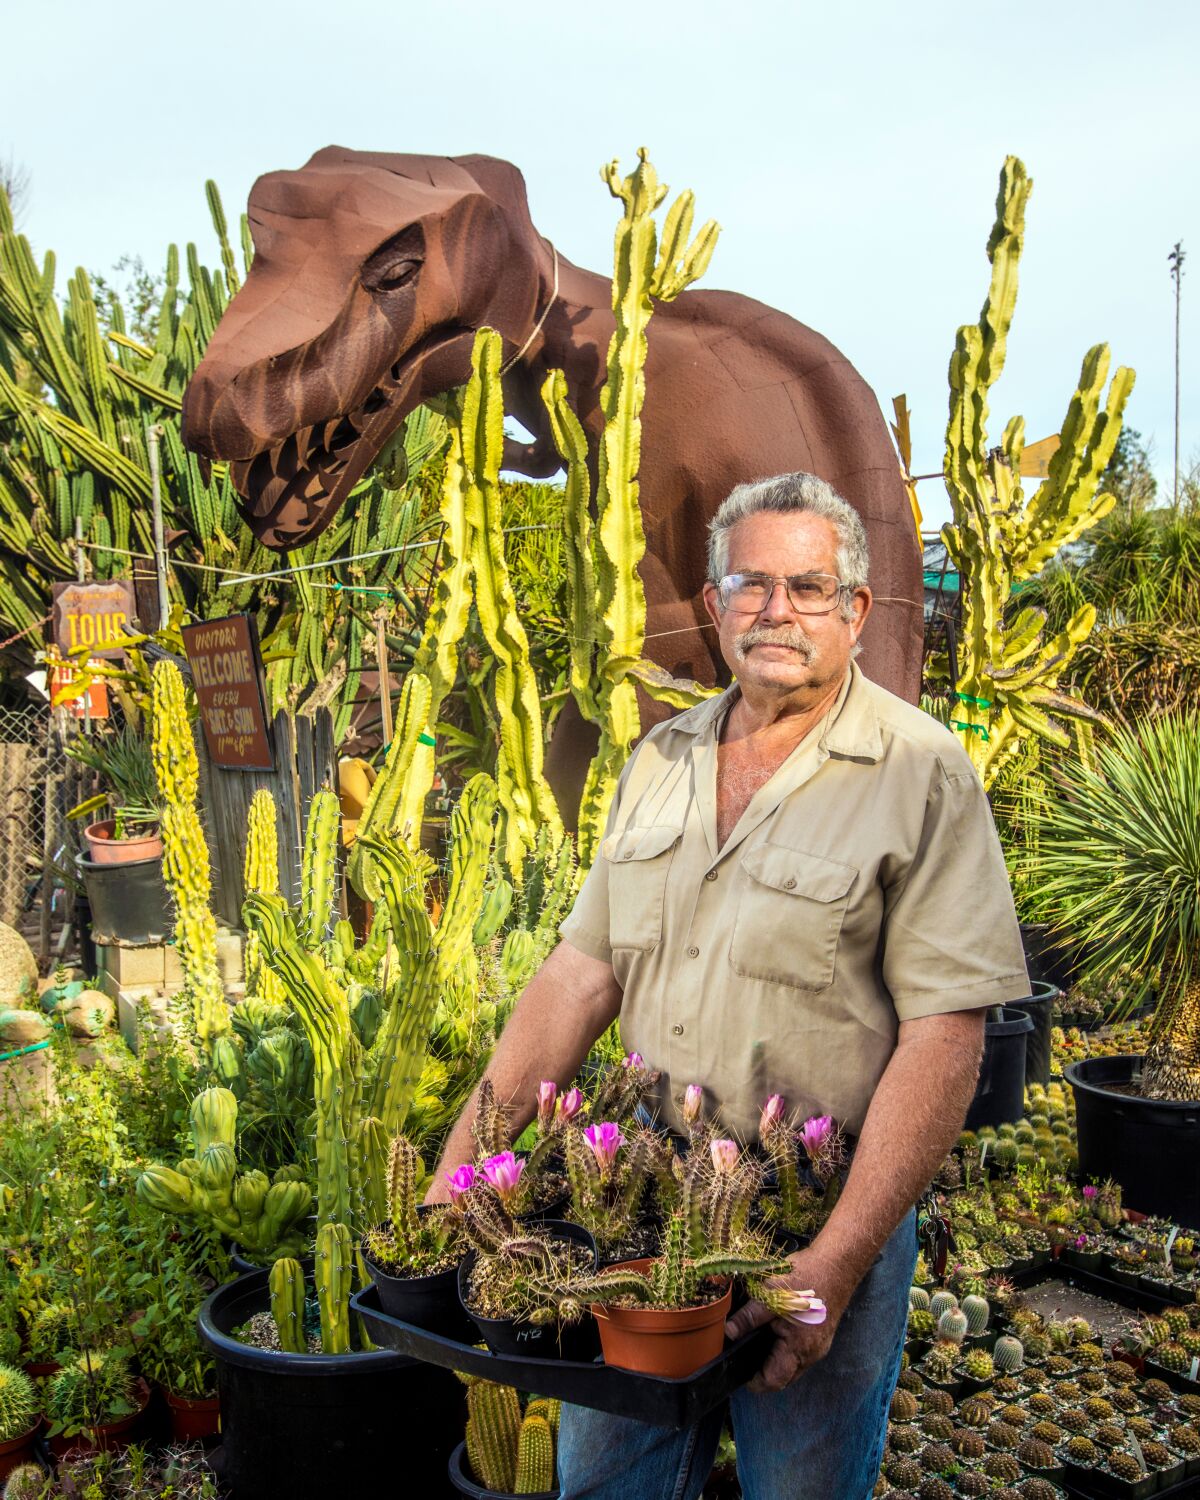 A man wearing glasses and button-down shirt stands in front of a metal dinosaur sculpture while holding a tray of cactus.